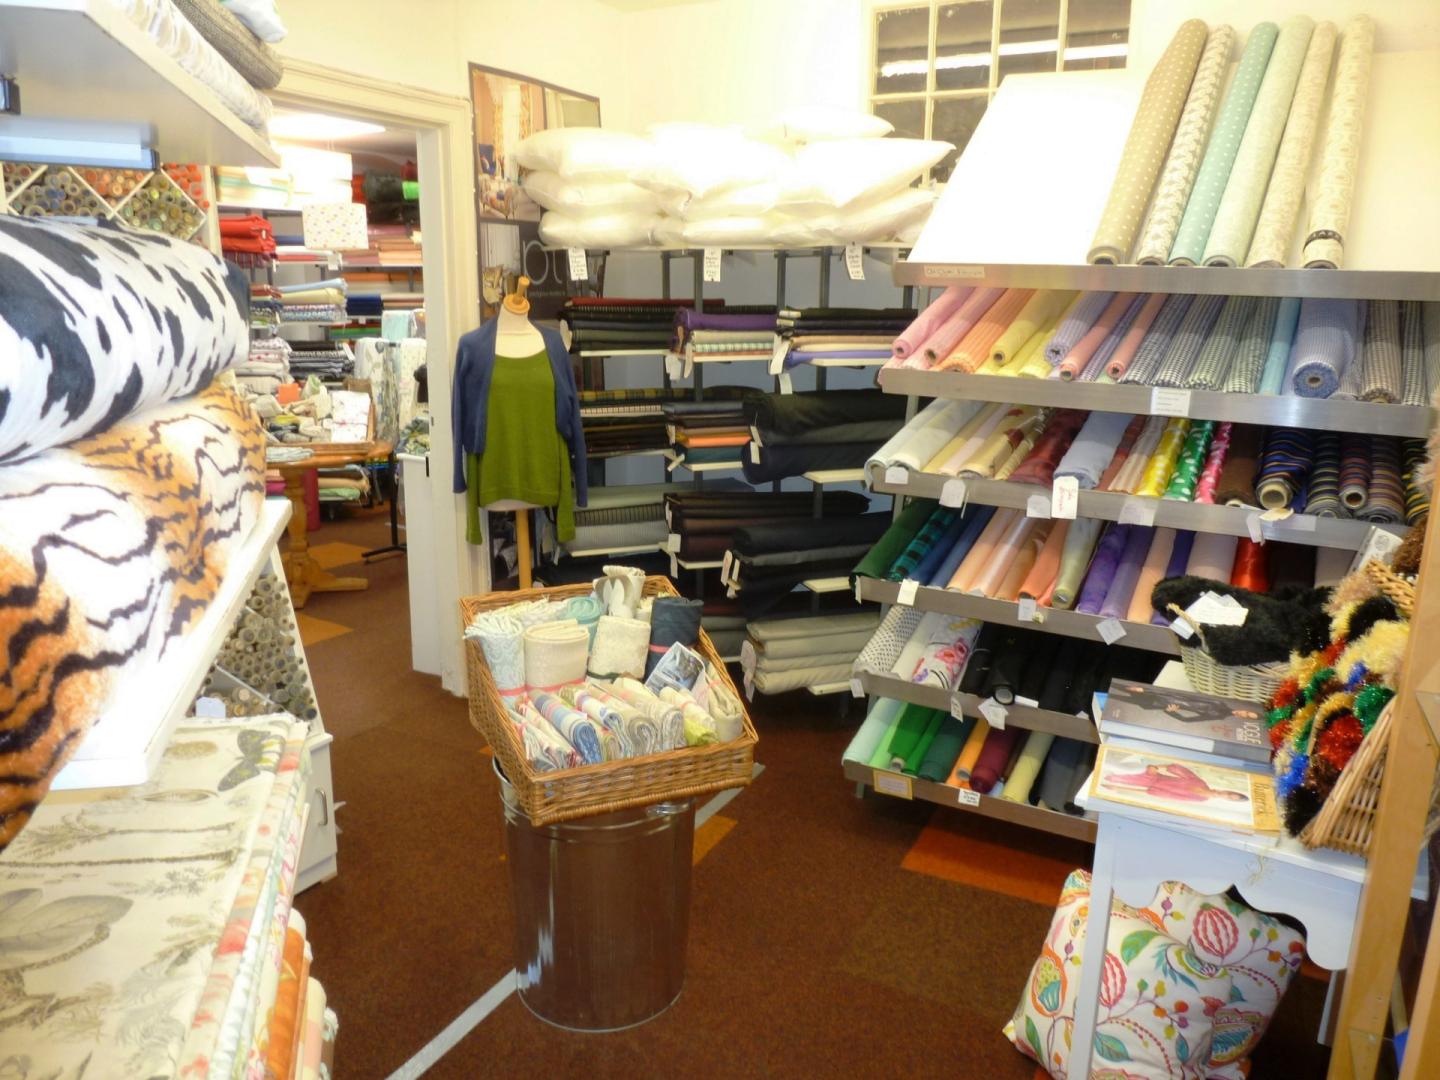 HA34962X - Soft Furnishing Shop Business for Sale in Crewkerne ...